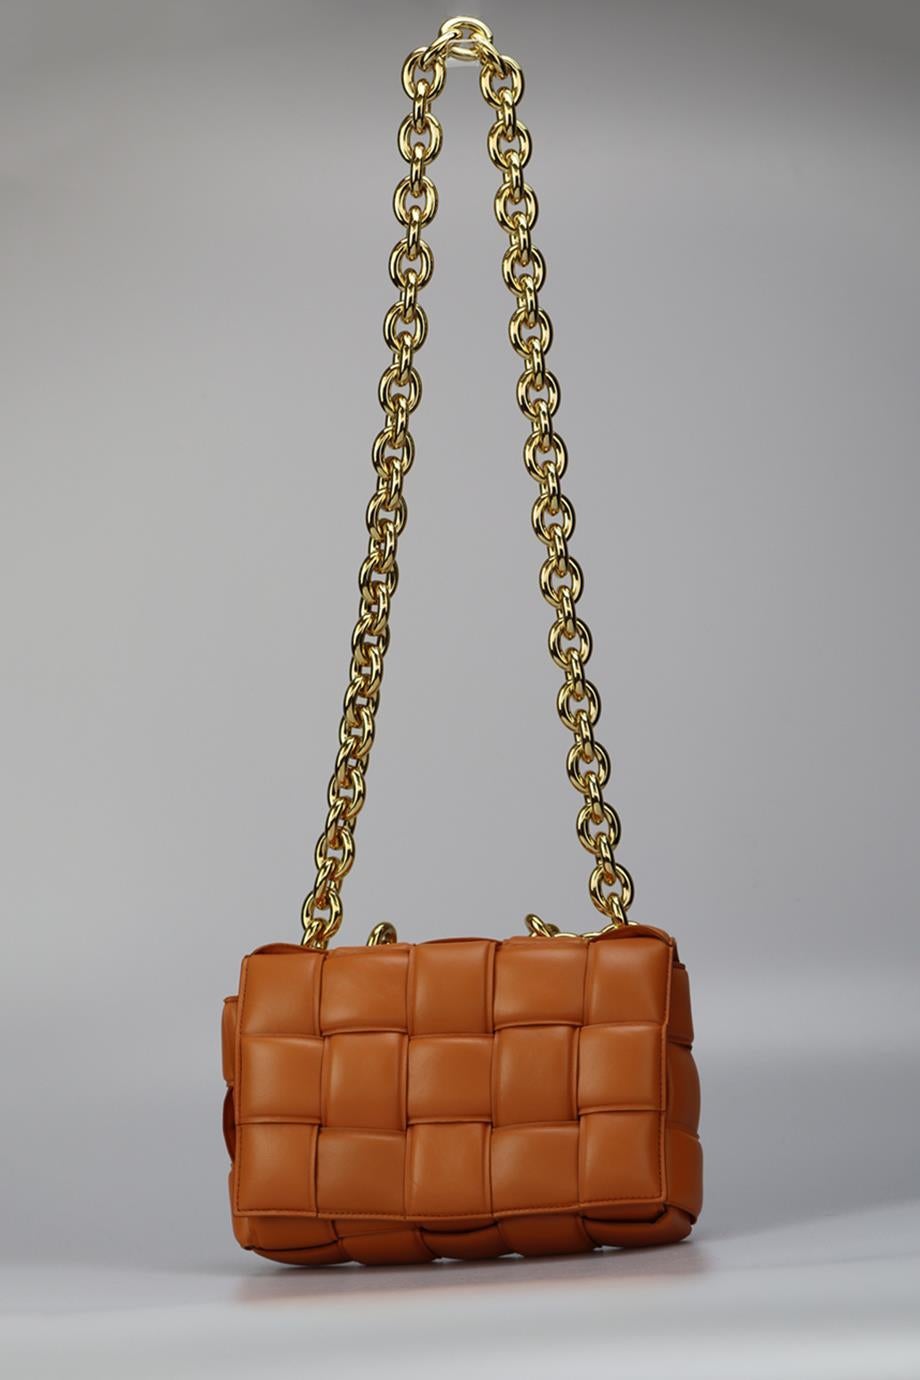 Bottega Veneta Cassette Chain Detailed Intrecciato Leather Shoulder Bag. Tan. Lock fastening - Front. Comes with - dustbag. Height: 7.3 In. Width: 10.6 In. Depth: 2.7 In. Handle drop: 4.5 In. Strap drop: 19.5 In. Condition: Used. Very good condition